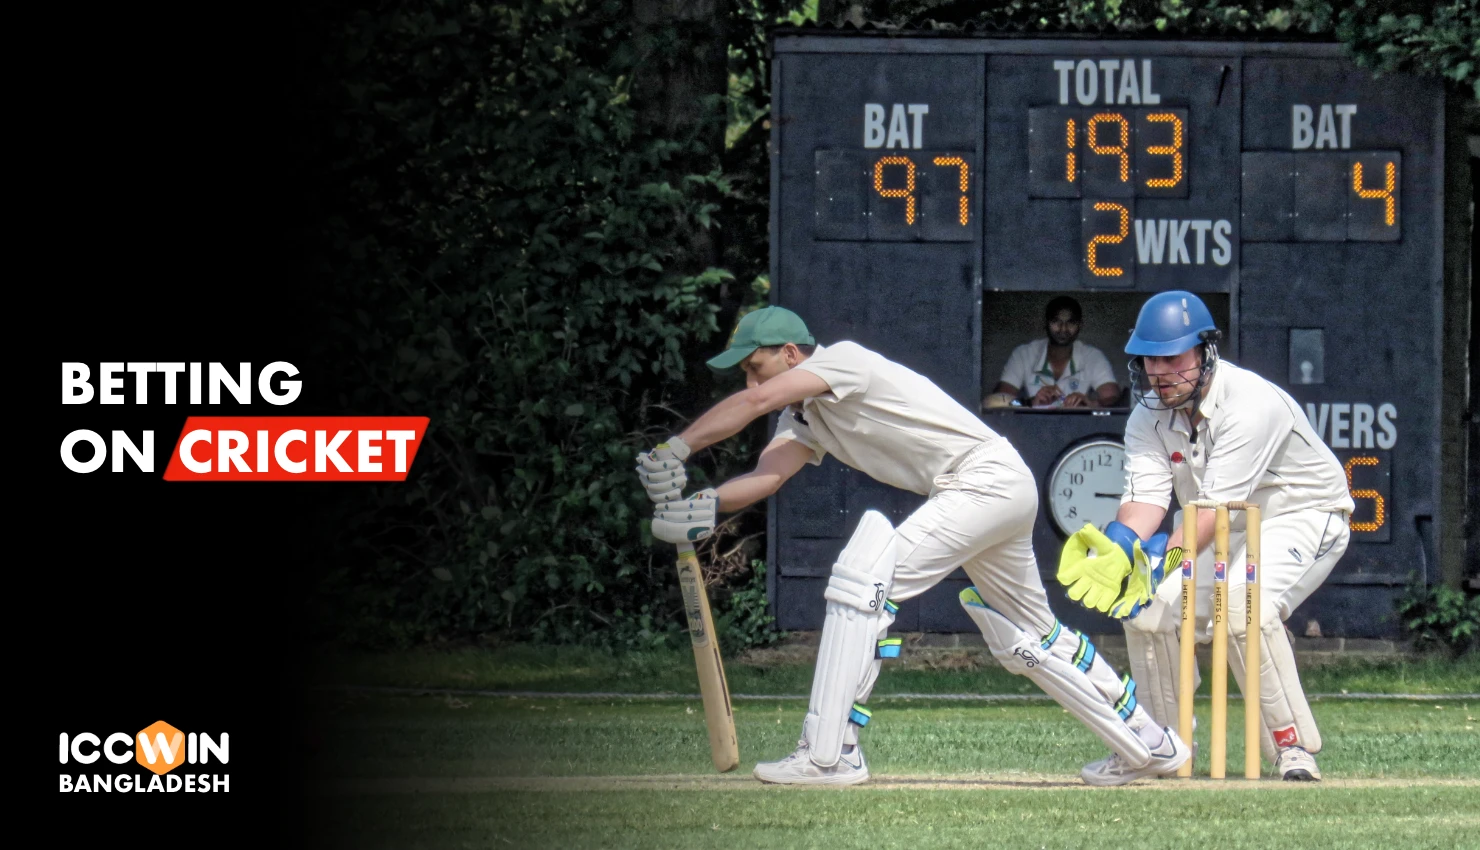 At Iccwin platform you can make a bet on popular cricket tournaments